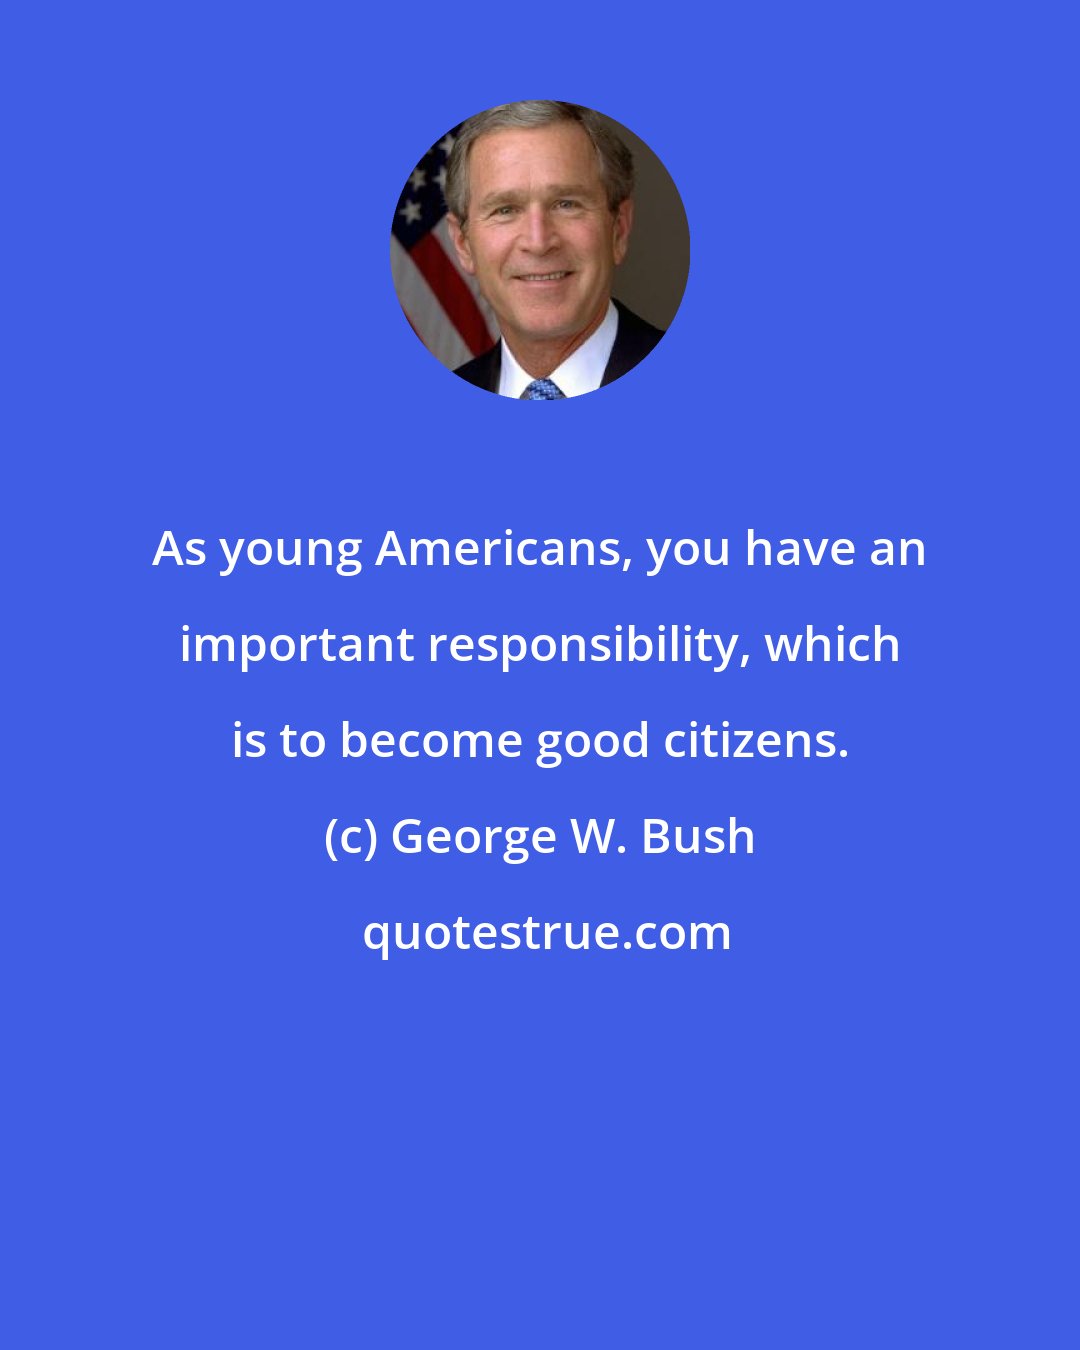 George W. Bush: As young Americans, you have an important responsibility, which is to become good citizens.